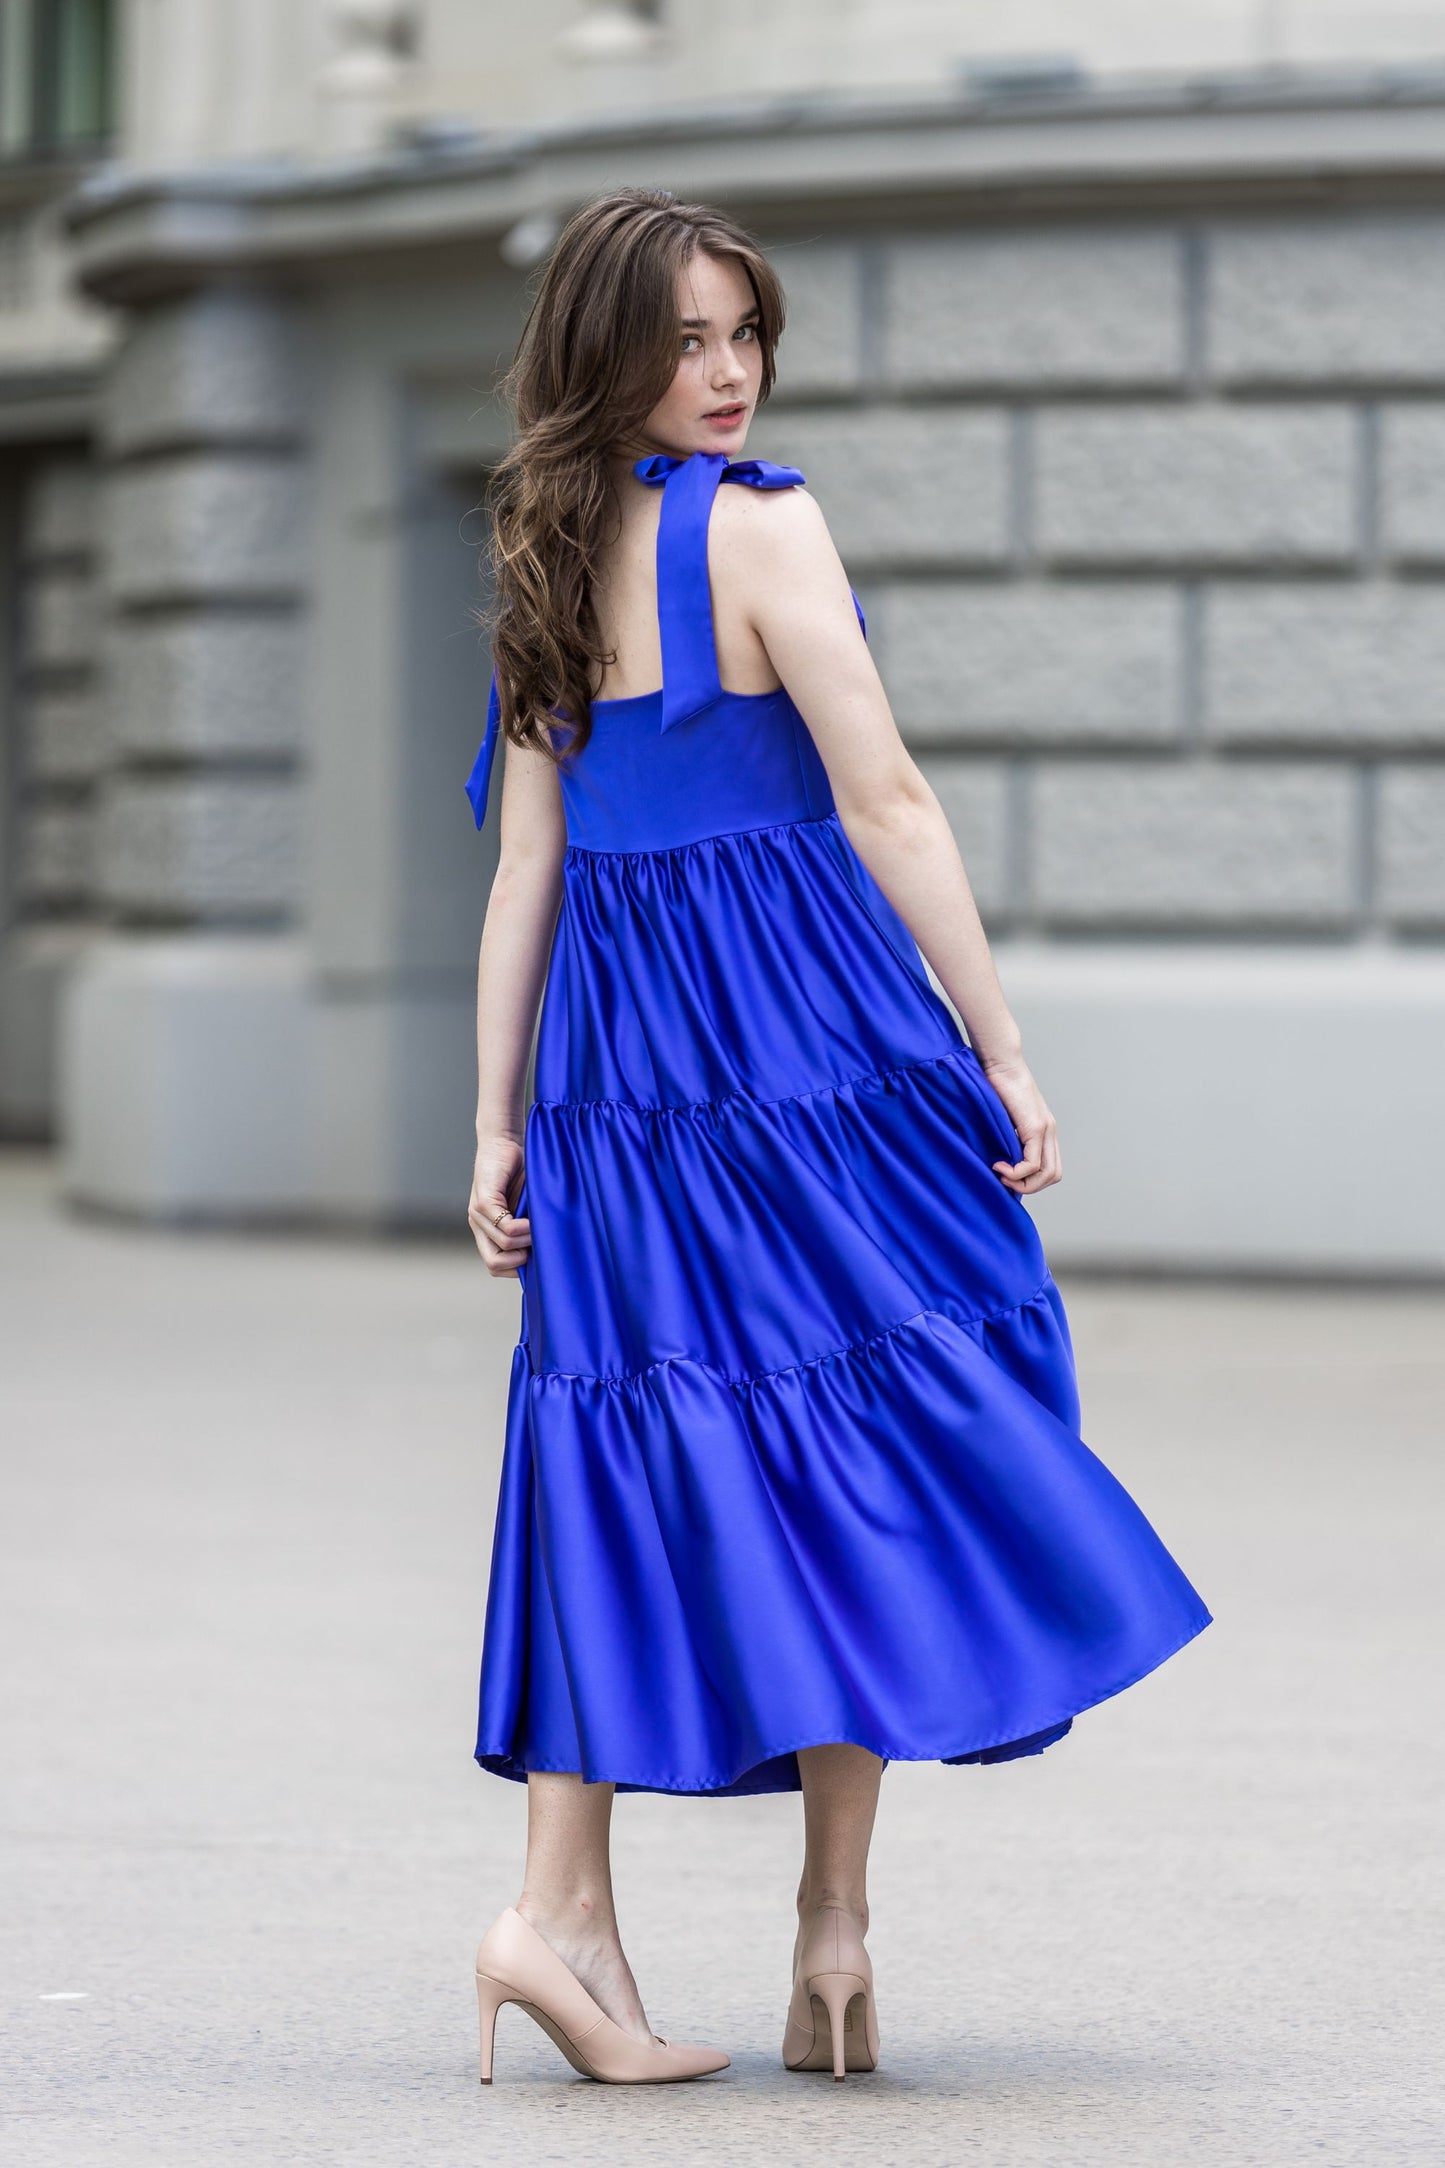 Cornflower blue satin dress with super bows on the shoulders